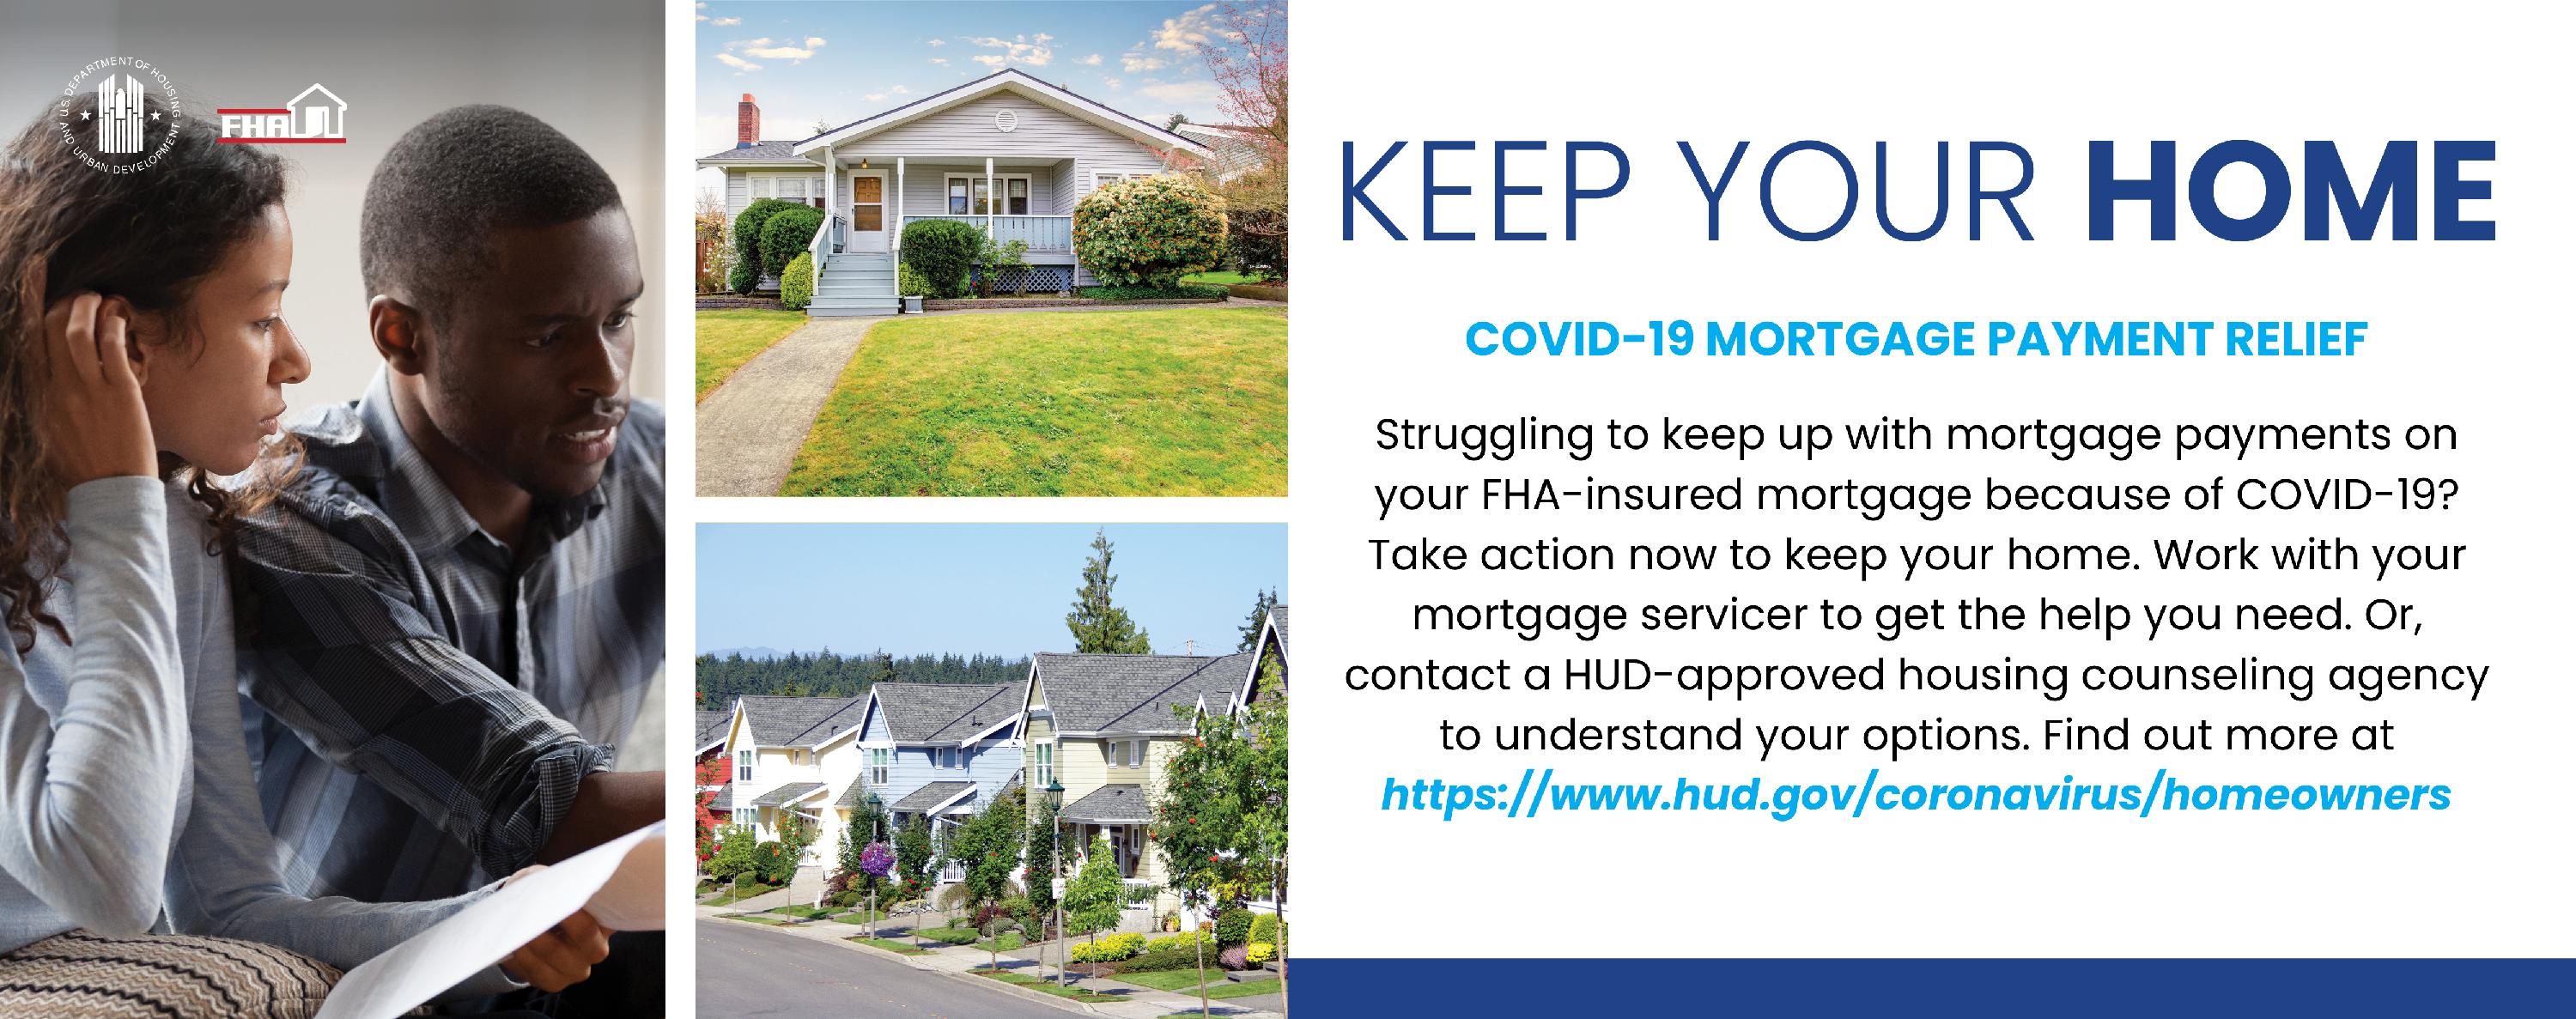 Covid-19 Mortgage payment relief banner_edit